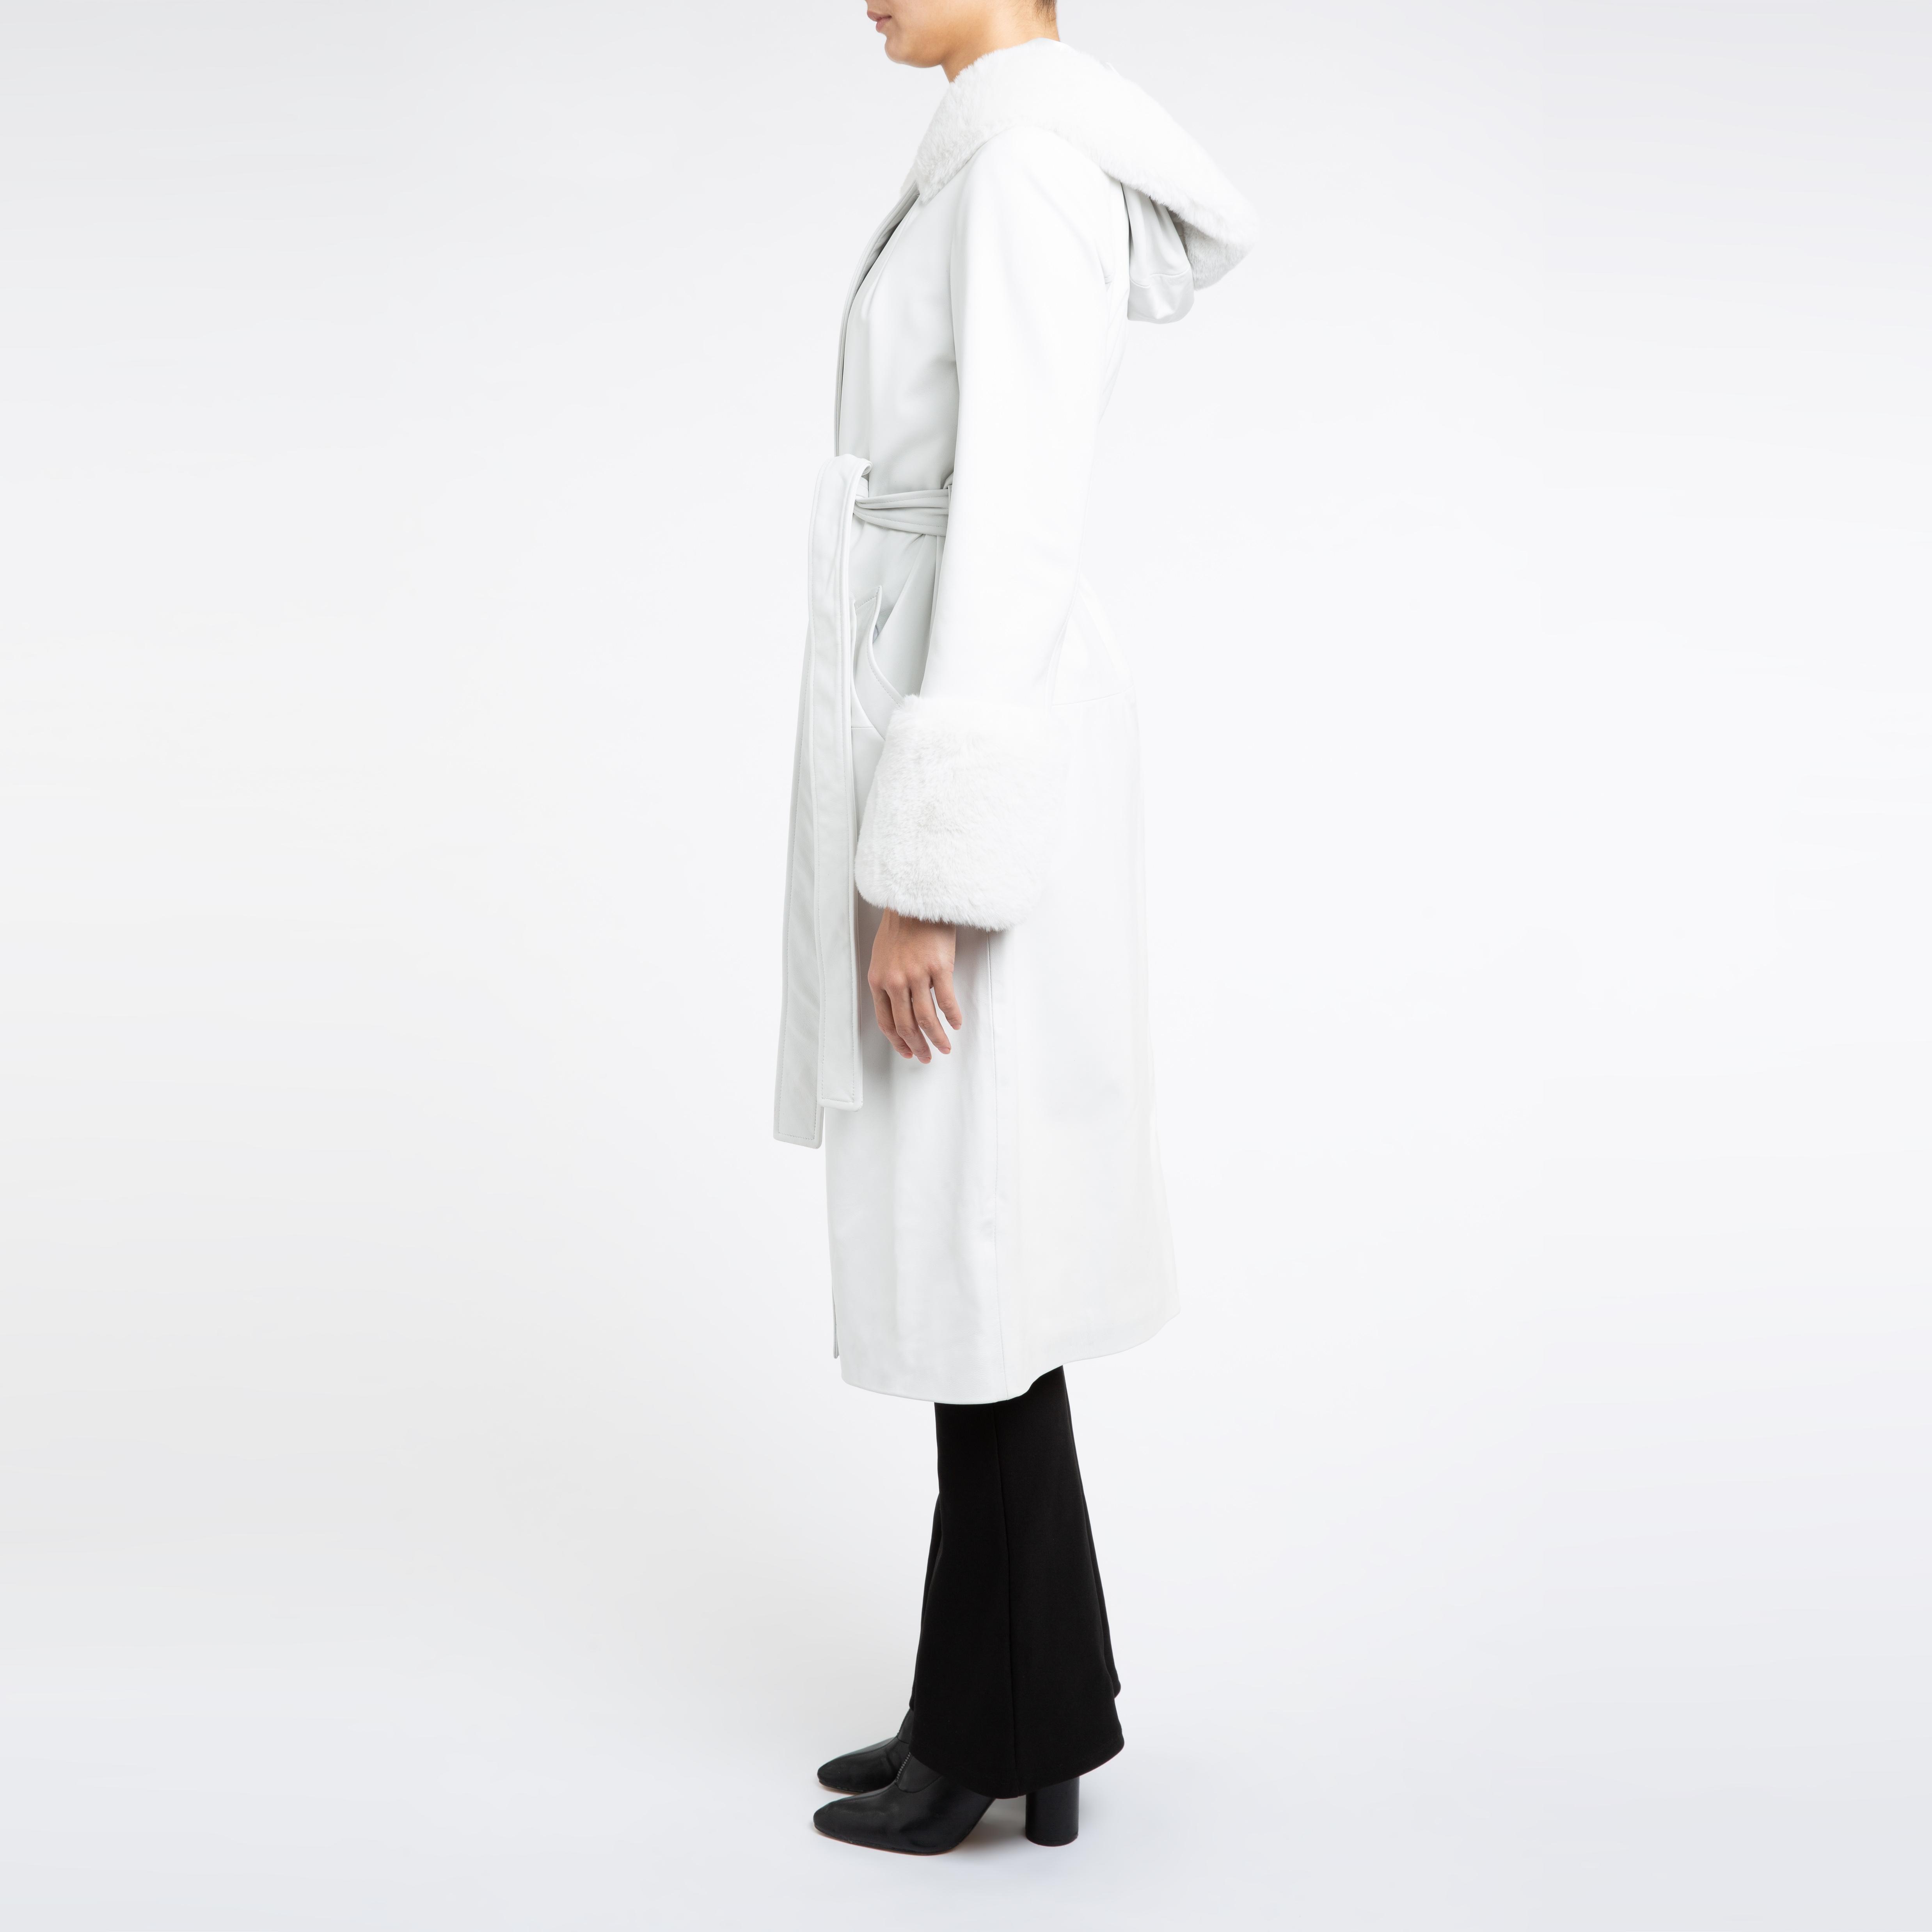 Verheyen Aurora Hooded Leather Trench Coat in White with Faux Fur - Size uk 12  For Sale 2